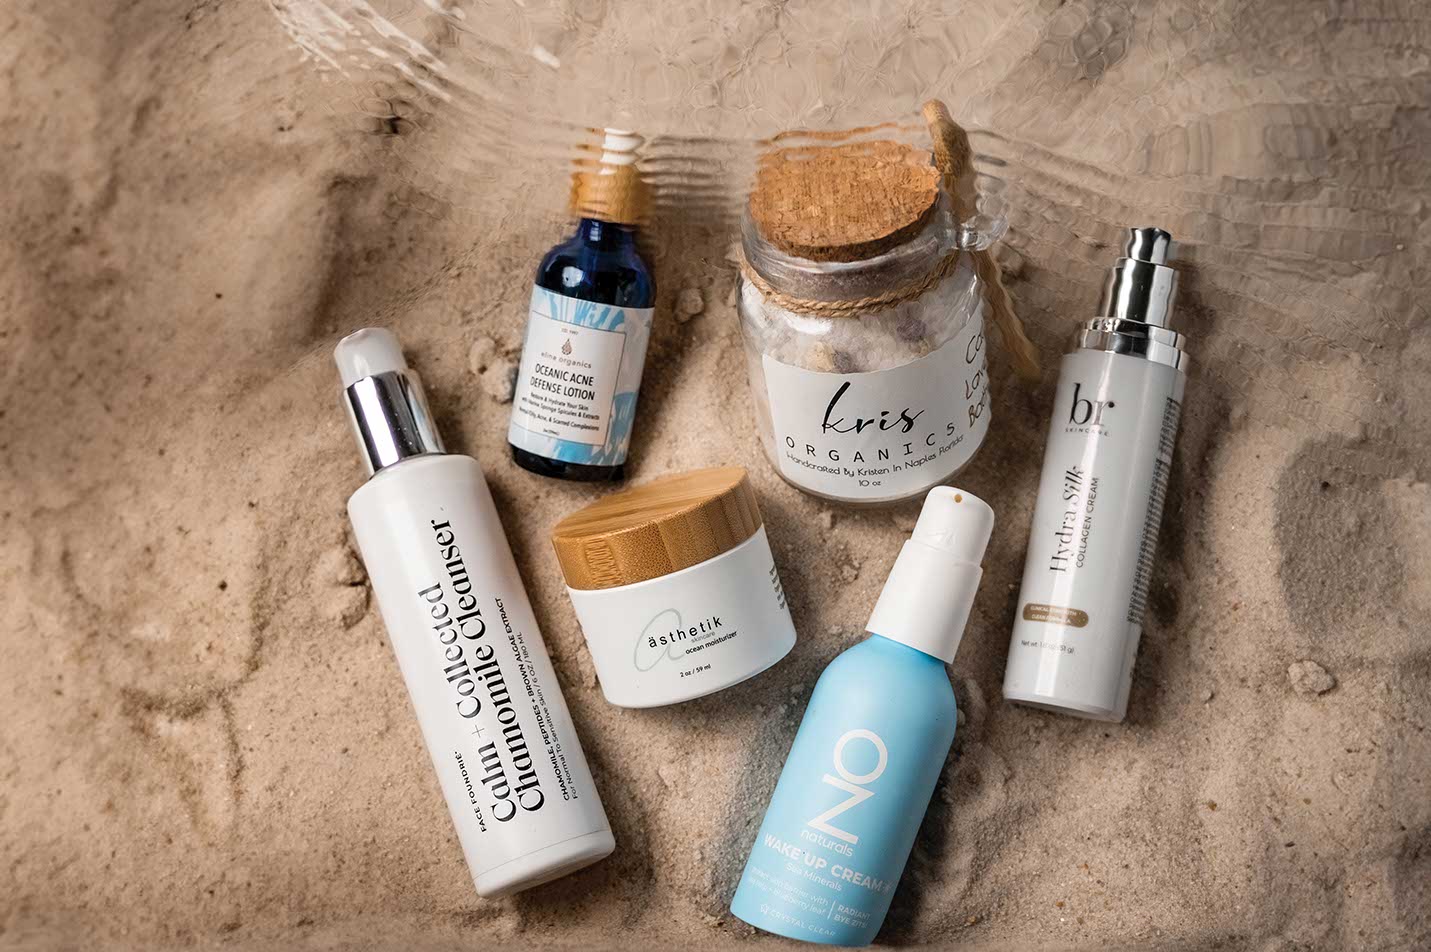 Natural skincare from the sea